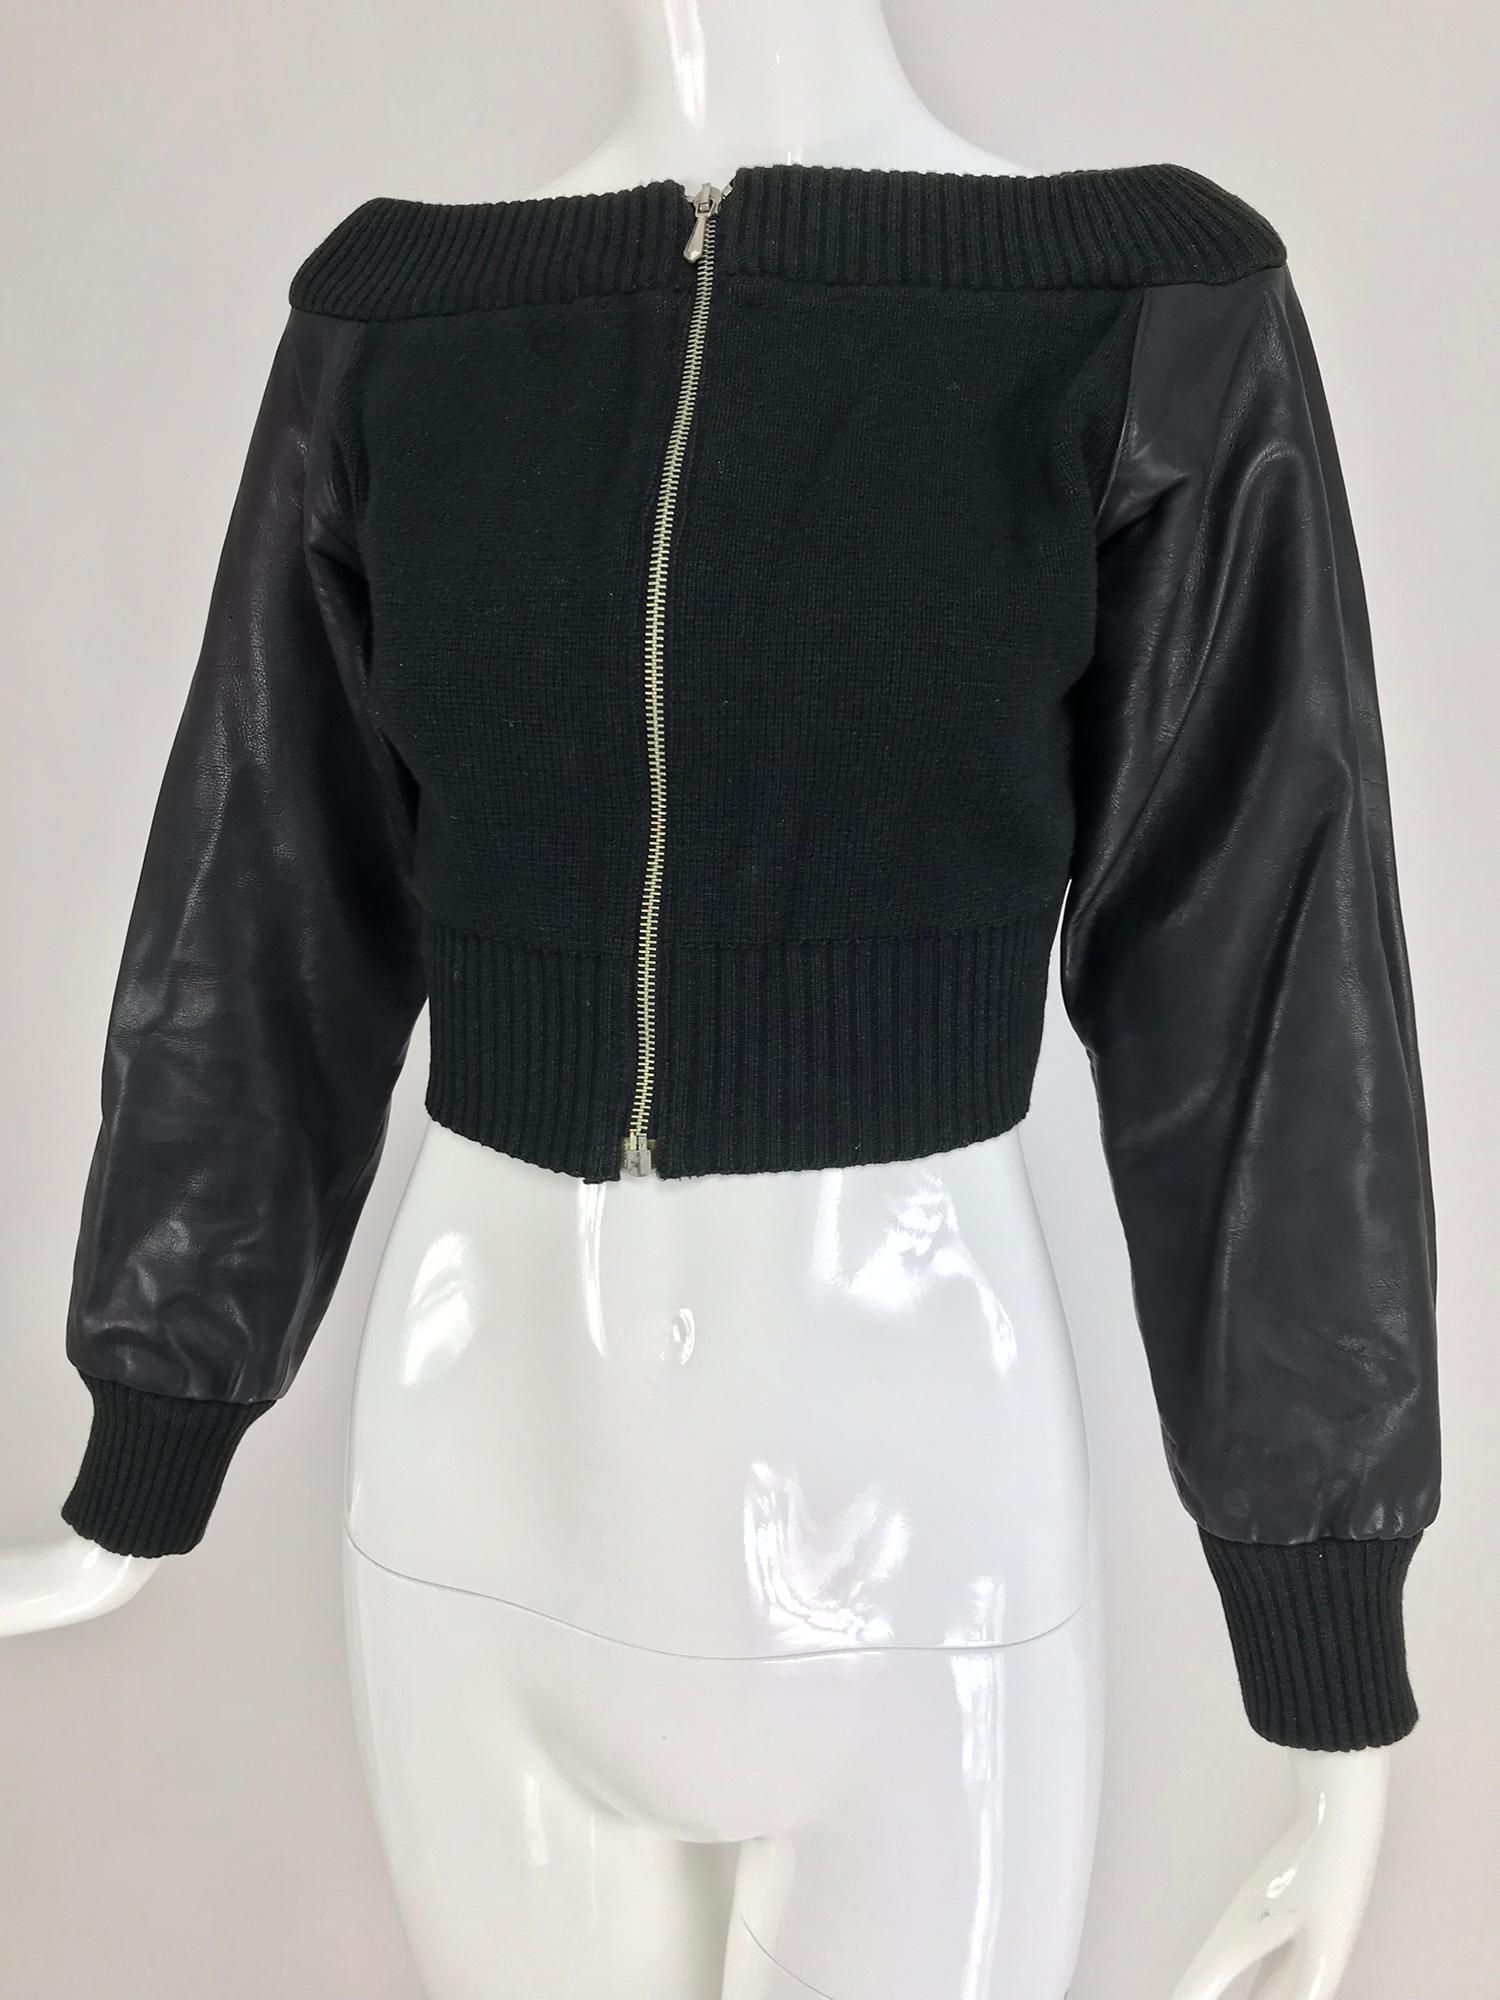 Jean Paul Gaultier black leather and Knit Off the Shoulder Jacket 1990s 6